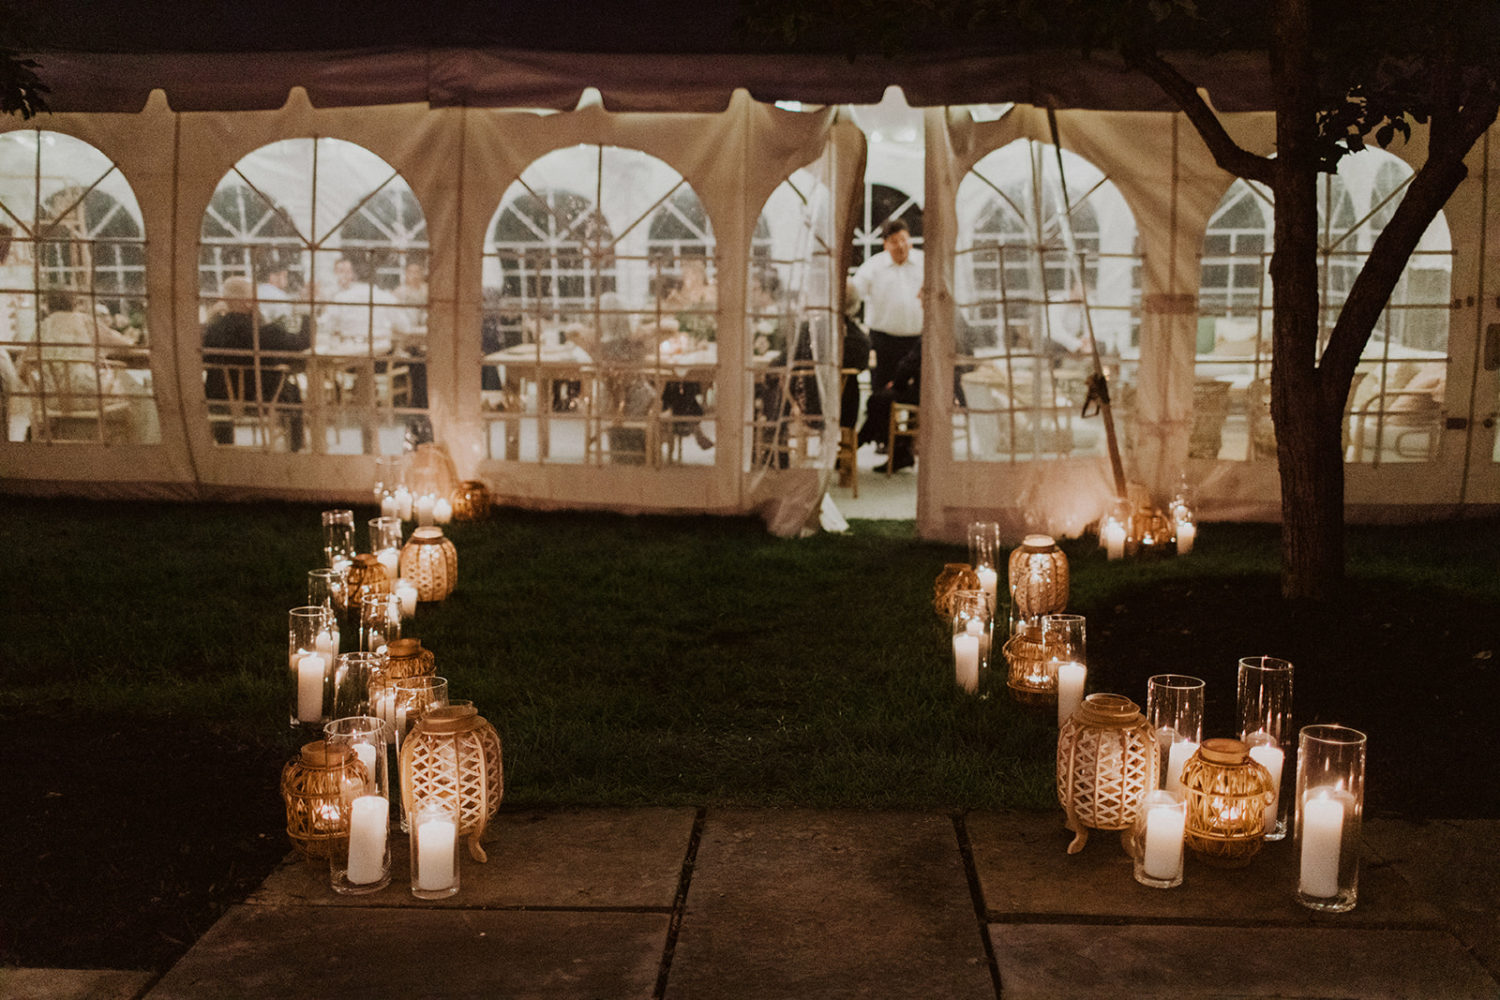 Reception tent lit by candles in vases at backyard wedding